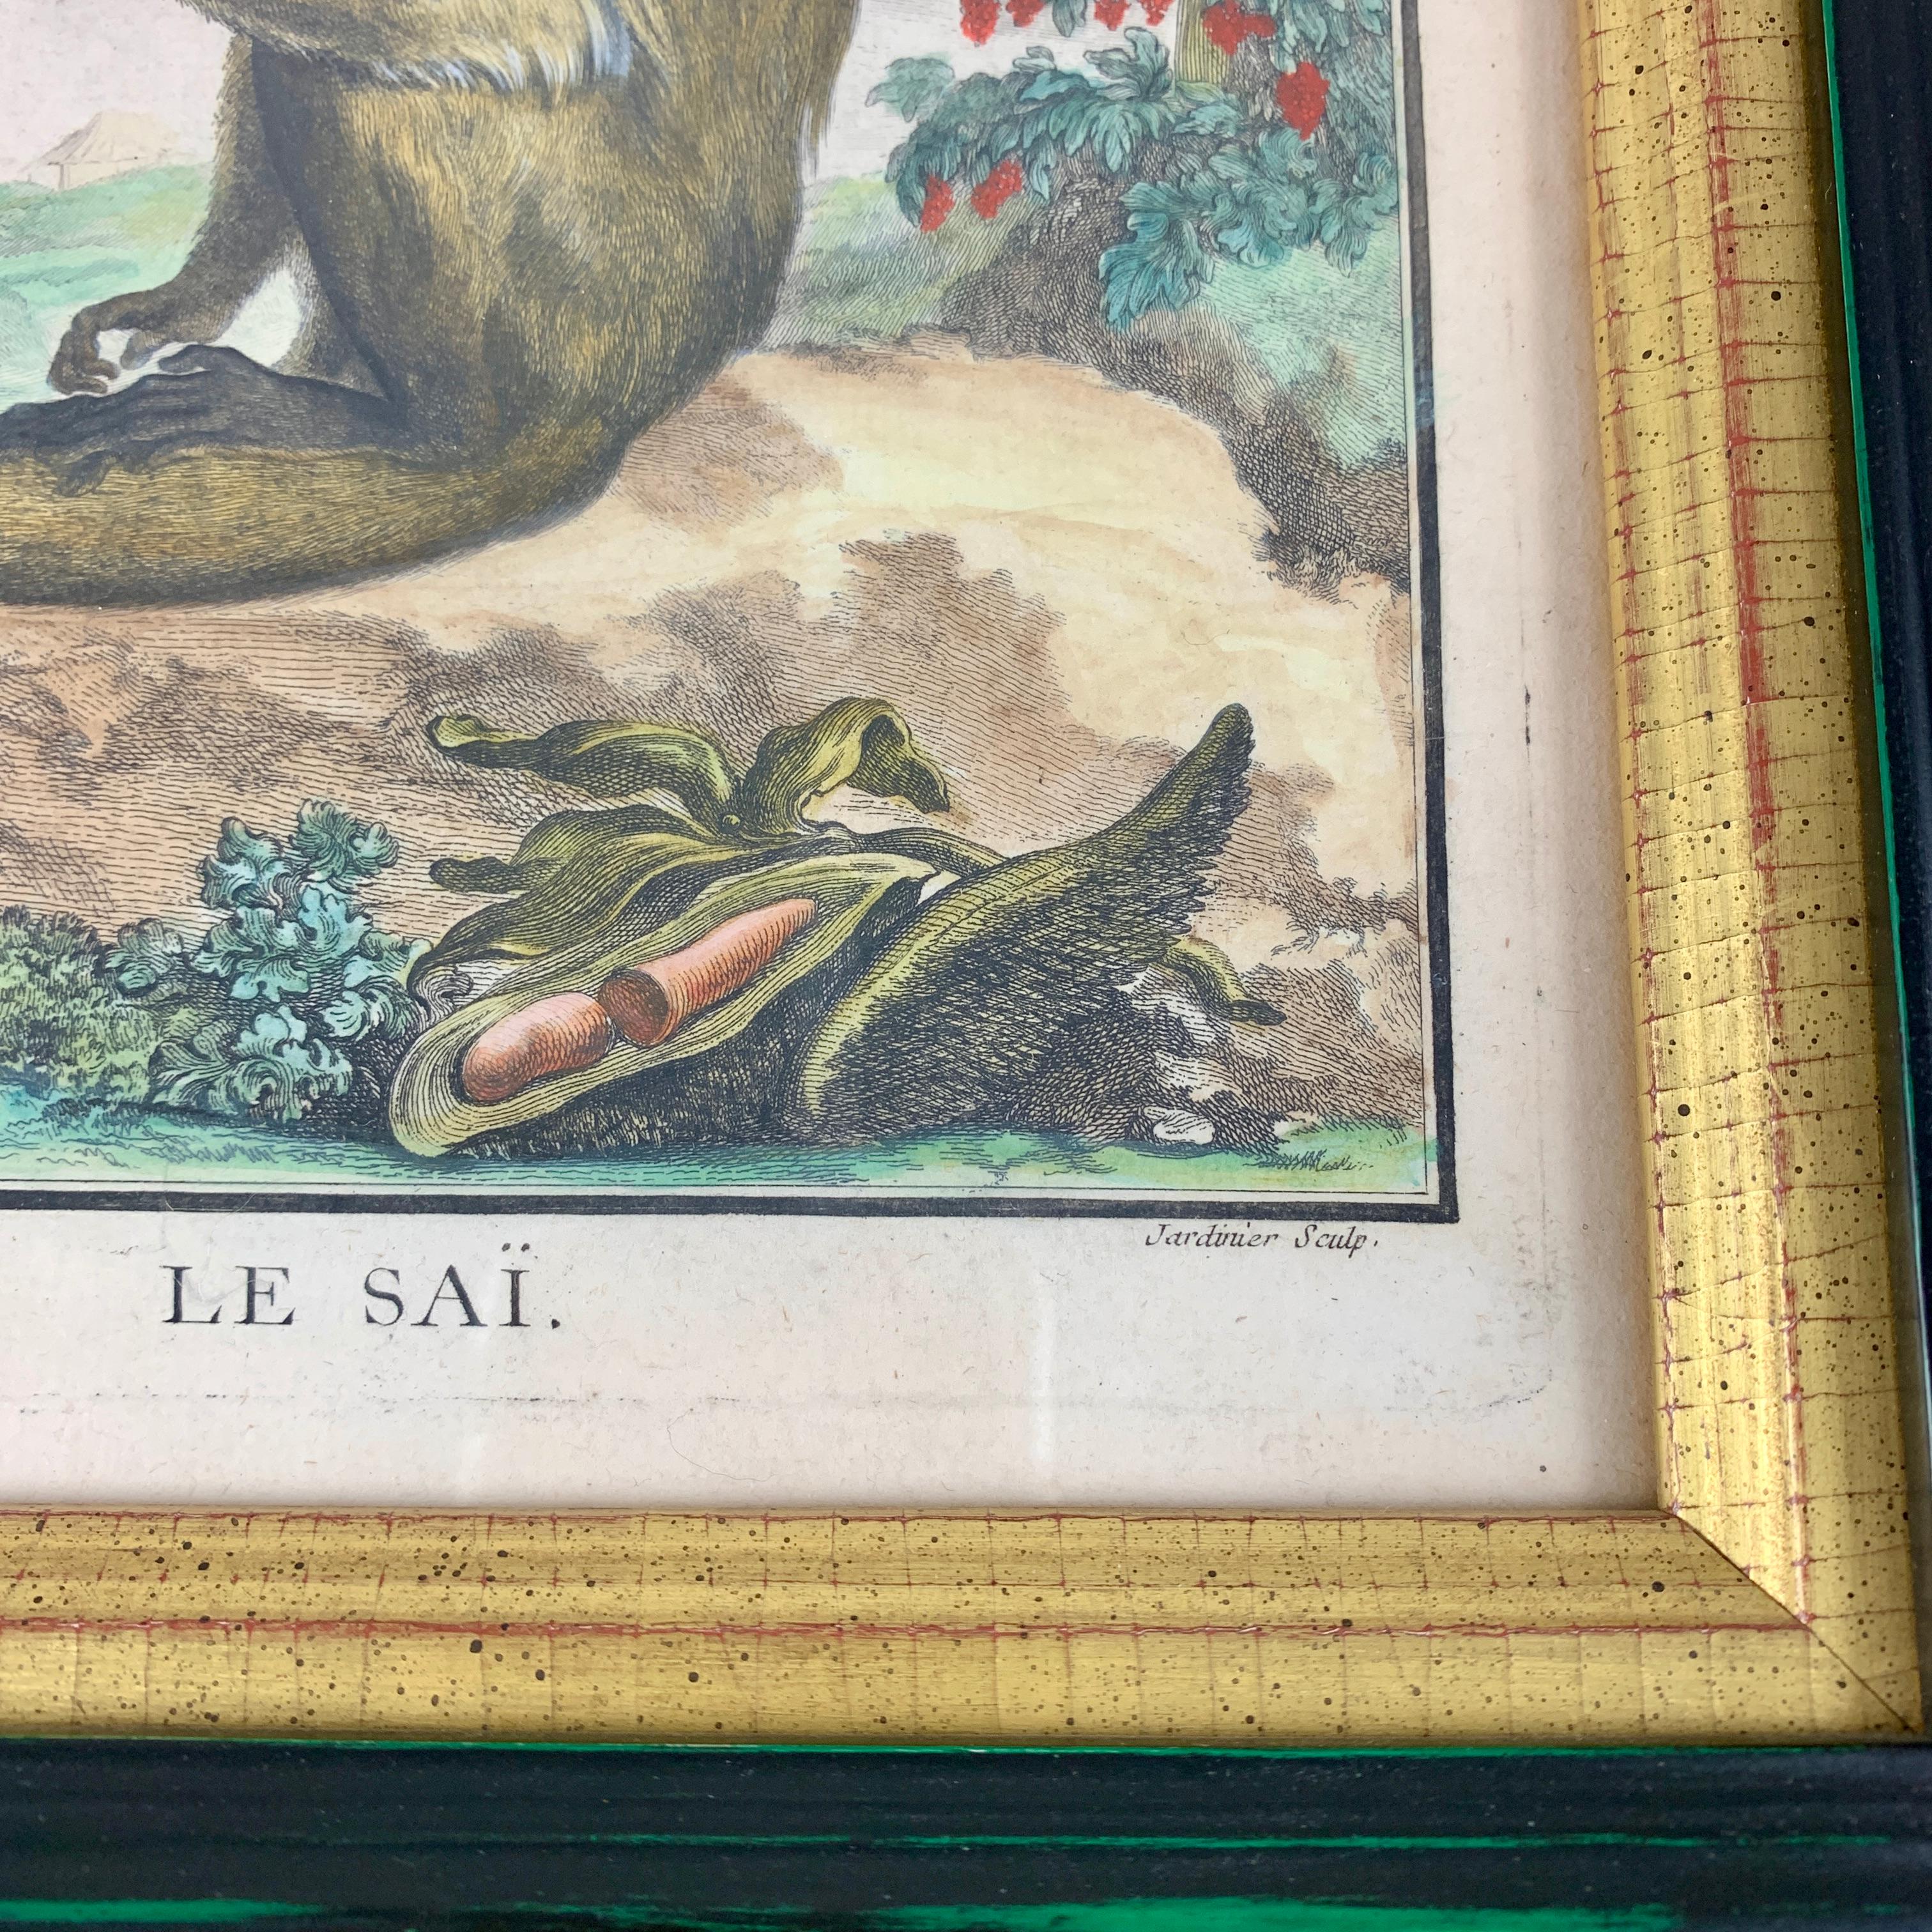 Hand-Painted Framed 18th Century Comte de Buffon Squirrel Monkey French Engraving, Le Saï